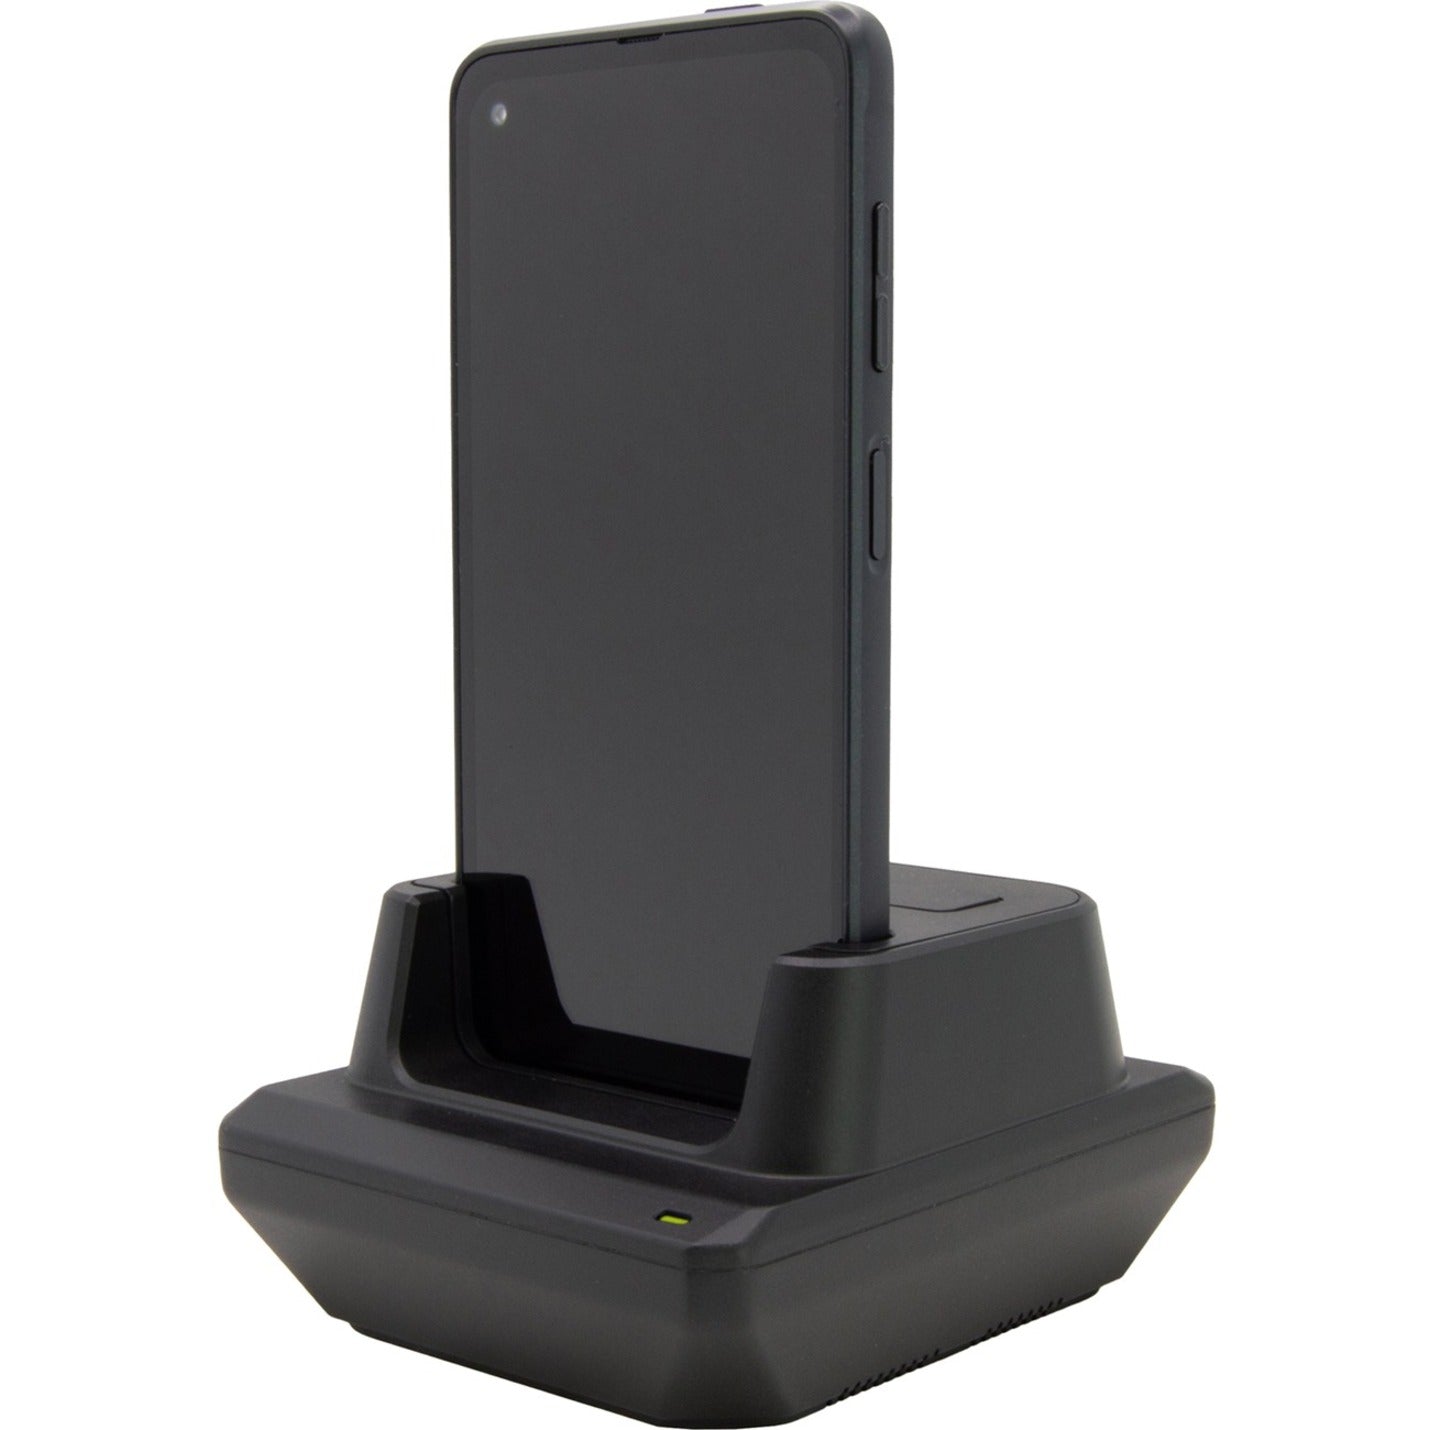 KoamTac 896424 Samsung Galaxy XCover Pro 1-slot Charging Cradle US, Convenient Charging Solution for Your SmartSled